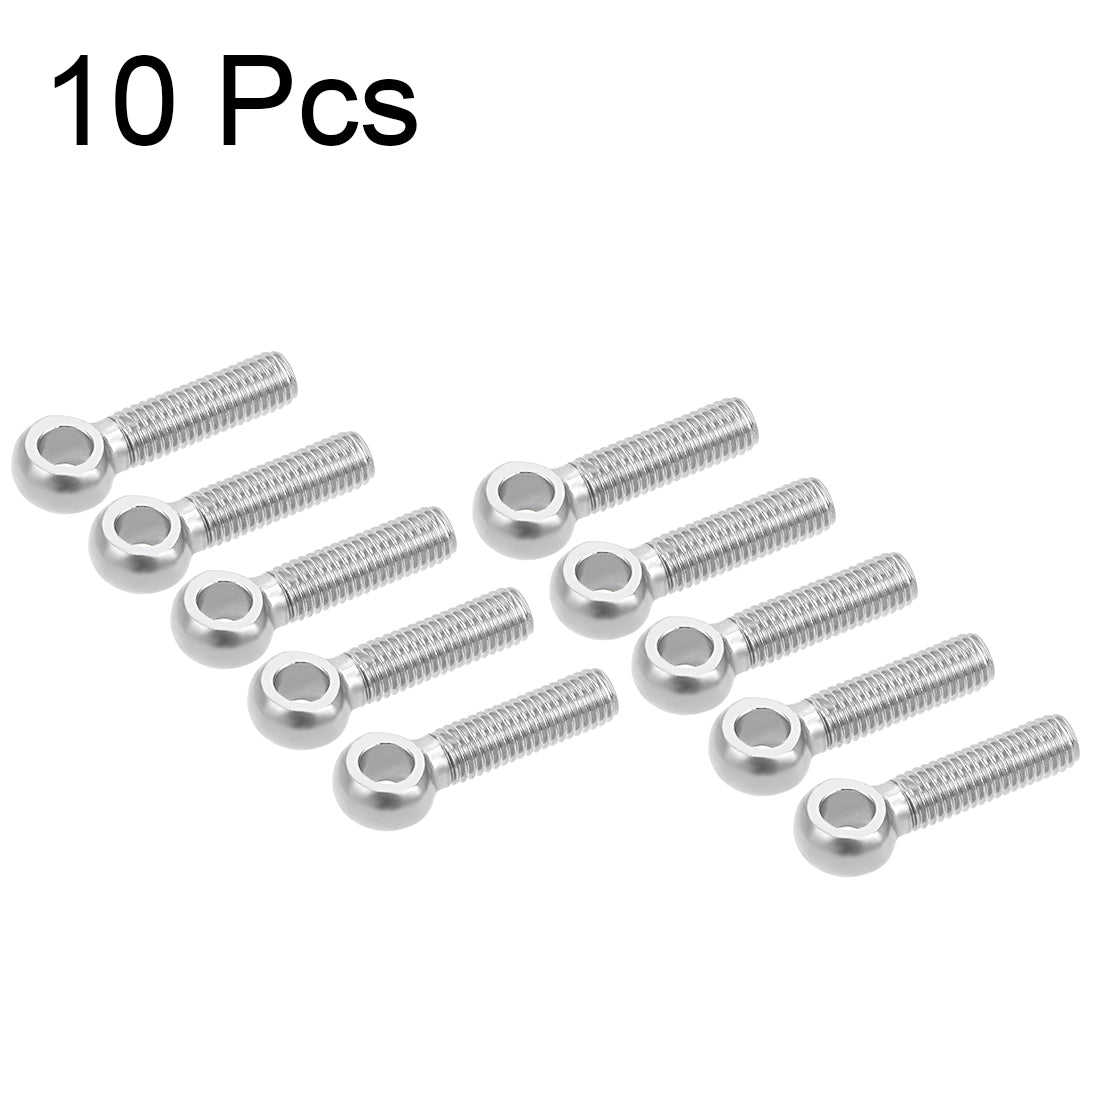 Uxcell Uxcell M6 x 50mm 304 Stainless Steel Machine Shoulder Lift Eye Bolt Rigging 10pcs